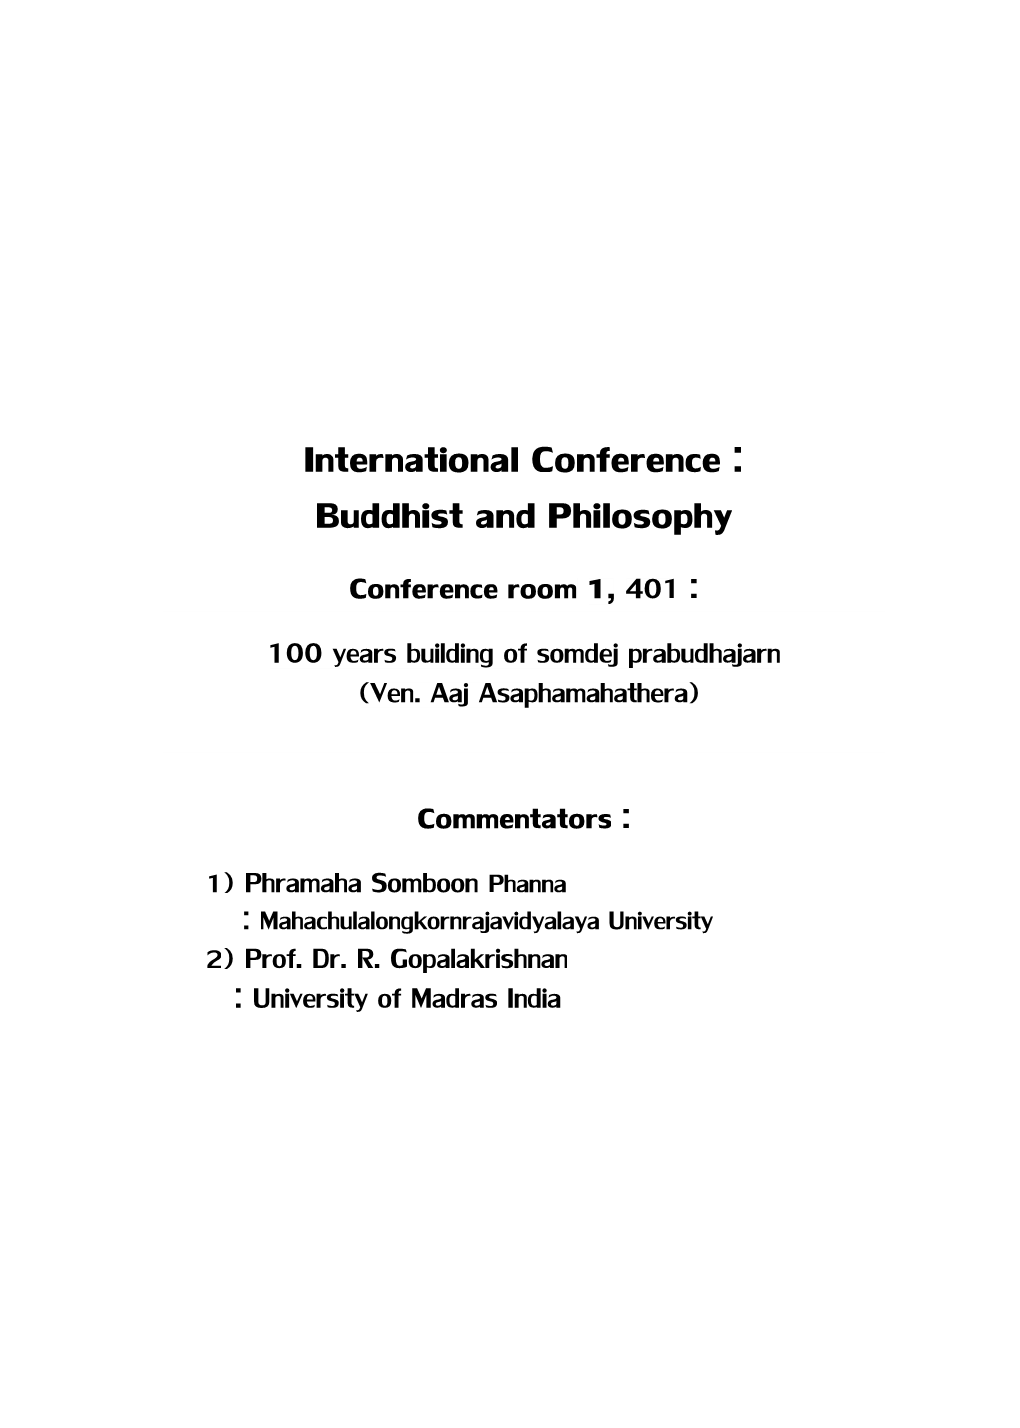 International Conference : Buddhist and Philosophy Conference Room 1, 401 : 100 Years Building of Somdej Prabudhajarn (Ven